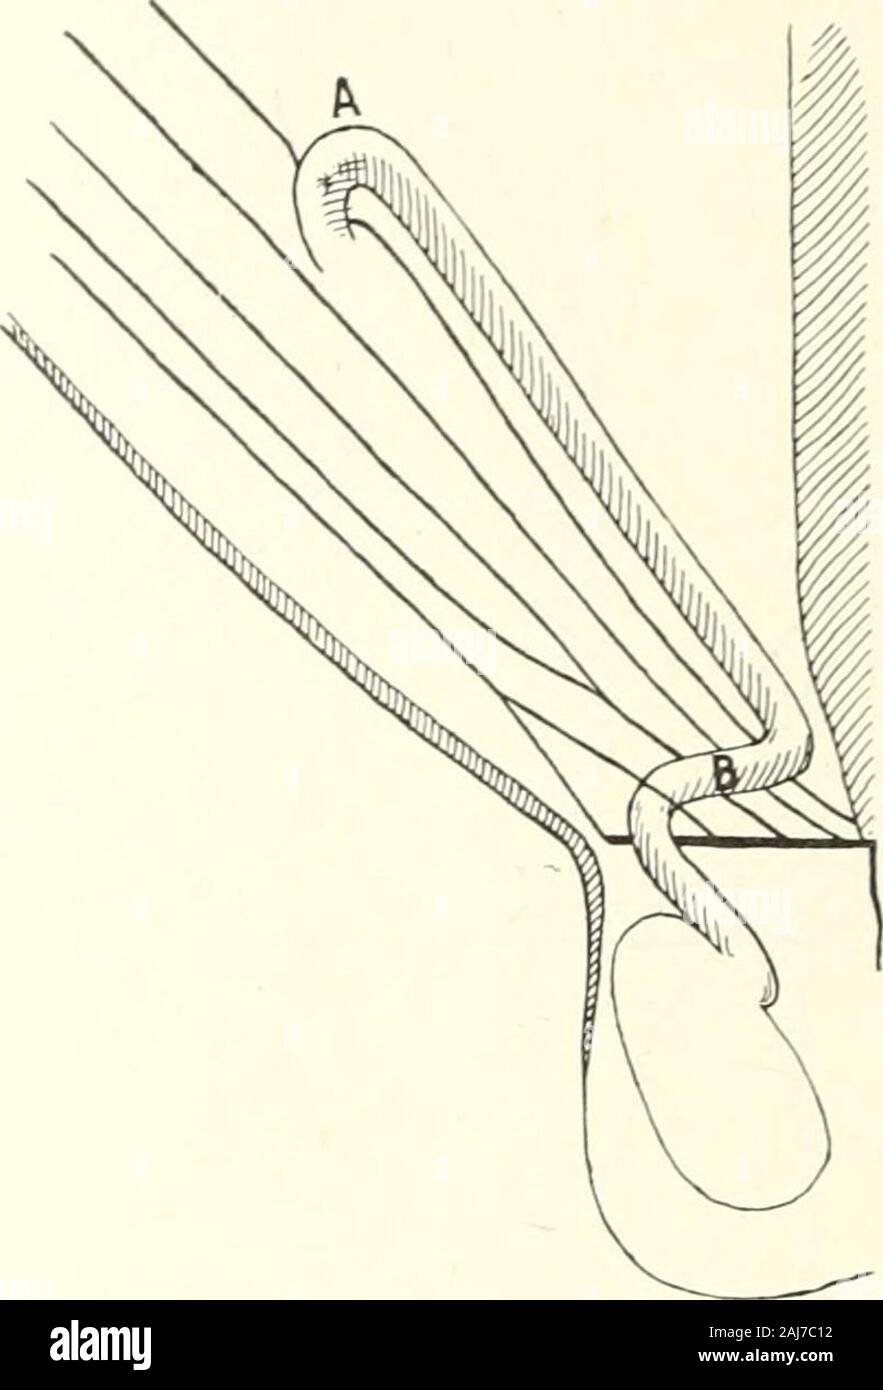 The medical age : a semi-monthly journal of medicine and surgery . ing the cord within the peritoneum. A diagram-matic representation of these methods follows. Fig. 3 (Halsteads operation)shows the cord placed between the external oblique muscle and the integu-ment, passing outside the external ring. In Fig. 4 (Bassinis method) the cordis seen passing between the external and internal oblique muscles andthrough the external ring. Fig. 5 (Fowlers method) has the cord placedwithin the peritoneal cavity and passing down to the pubis, then through theintervening tissues and external ring. Fowlers Stock Photo